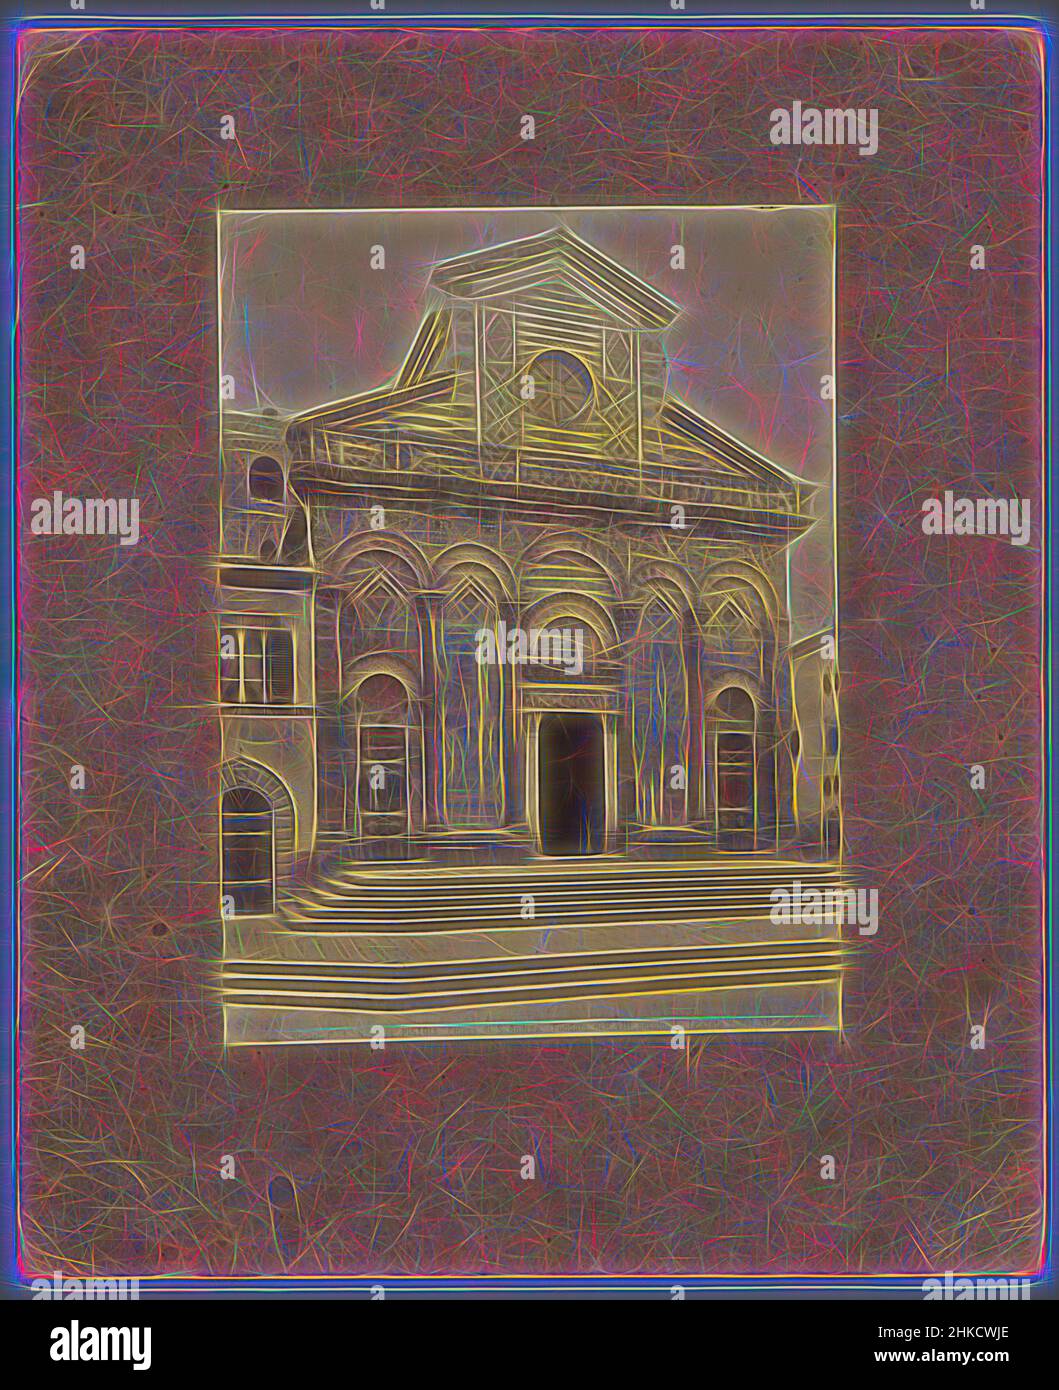 Inspired by Facade of the church of St. Andrew at Pistoia, PISTOIA - Chiesa di S. Andrea., Alinari, Pistoia, c. 1875 - c. 1900, albumen print, height 248 mm × width 184 mm, Reimagined by Artotop. Classic art reinvented with a modern twist. Design of warm cheerful glowing of brightness and light ray radiance. Photography inspired by surrealism and futurism, embracing dynamic energy of modern technology, movement, speed and revolutionize culture Stock Photo